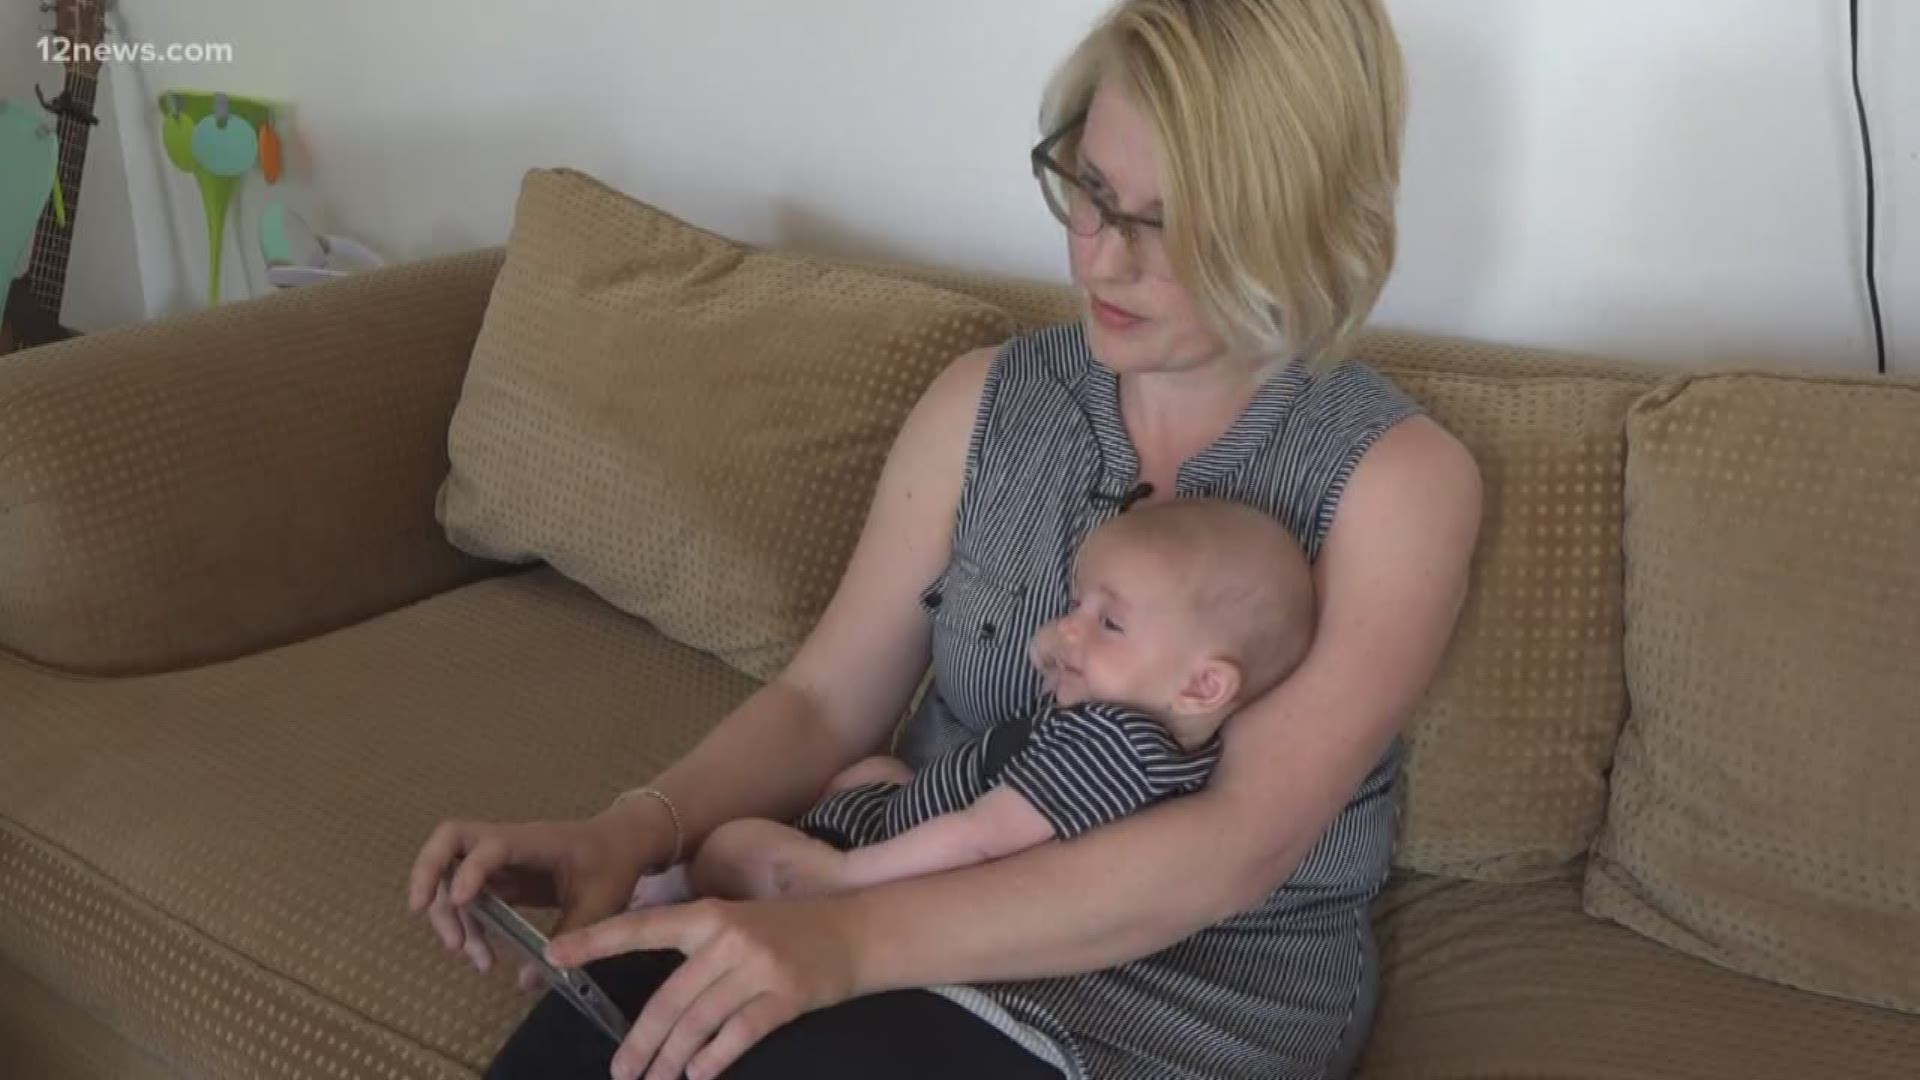 A Tempe mom was breastfeeding her newborn while visiting her third-grade daughter at Kieva Elementary. The mother says she was confronted over the breastfeeding by school officials, but she says she has the right to breastfeed anywhere in public.